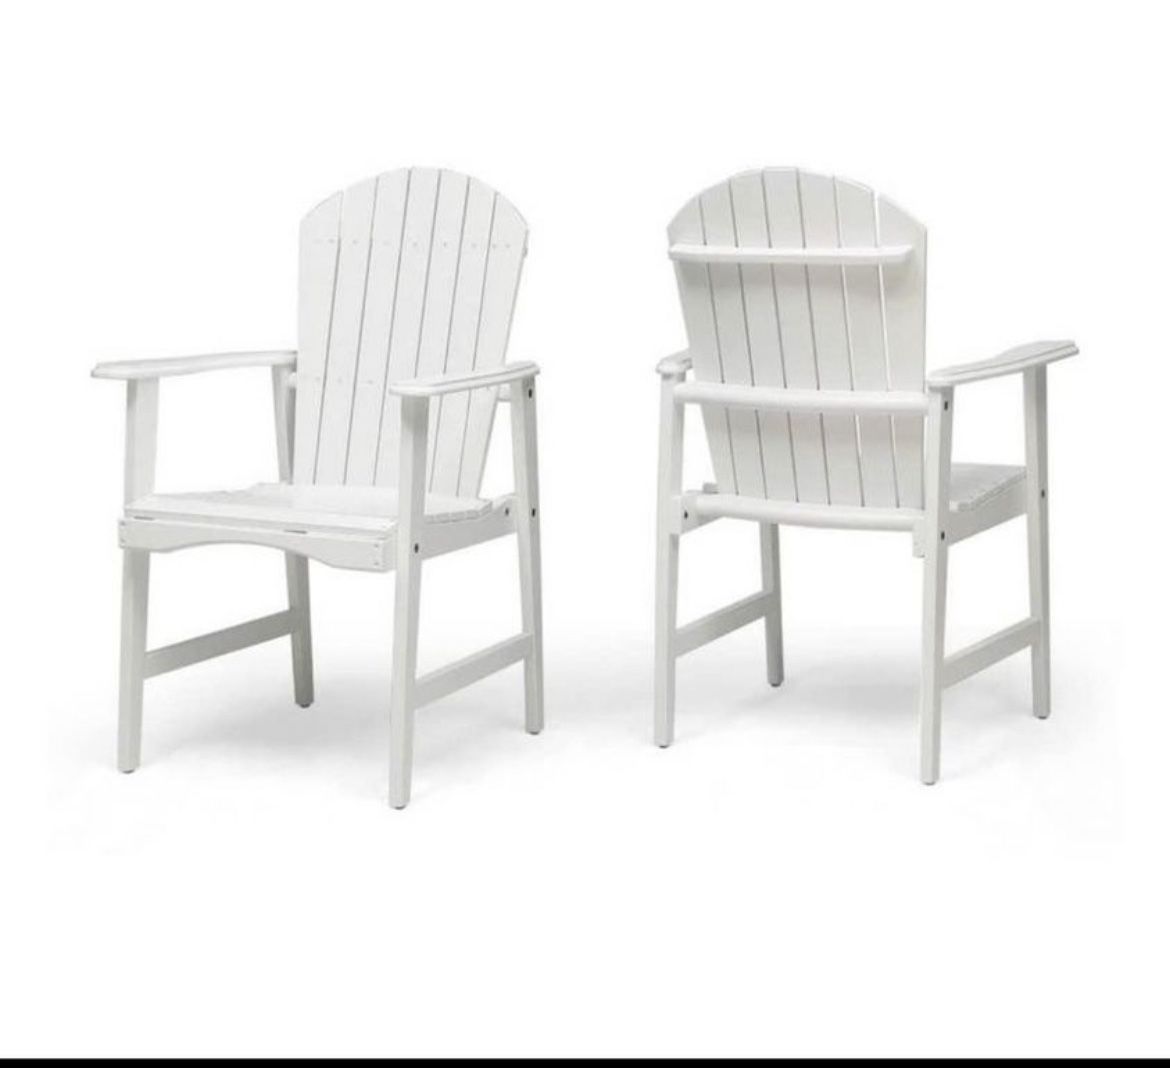 Ariel Outdoor Weather Resistant Acacia Wood Adirondack Dining Chairs, Set of 2,